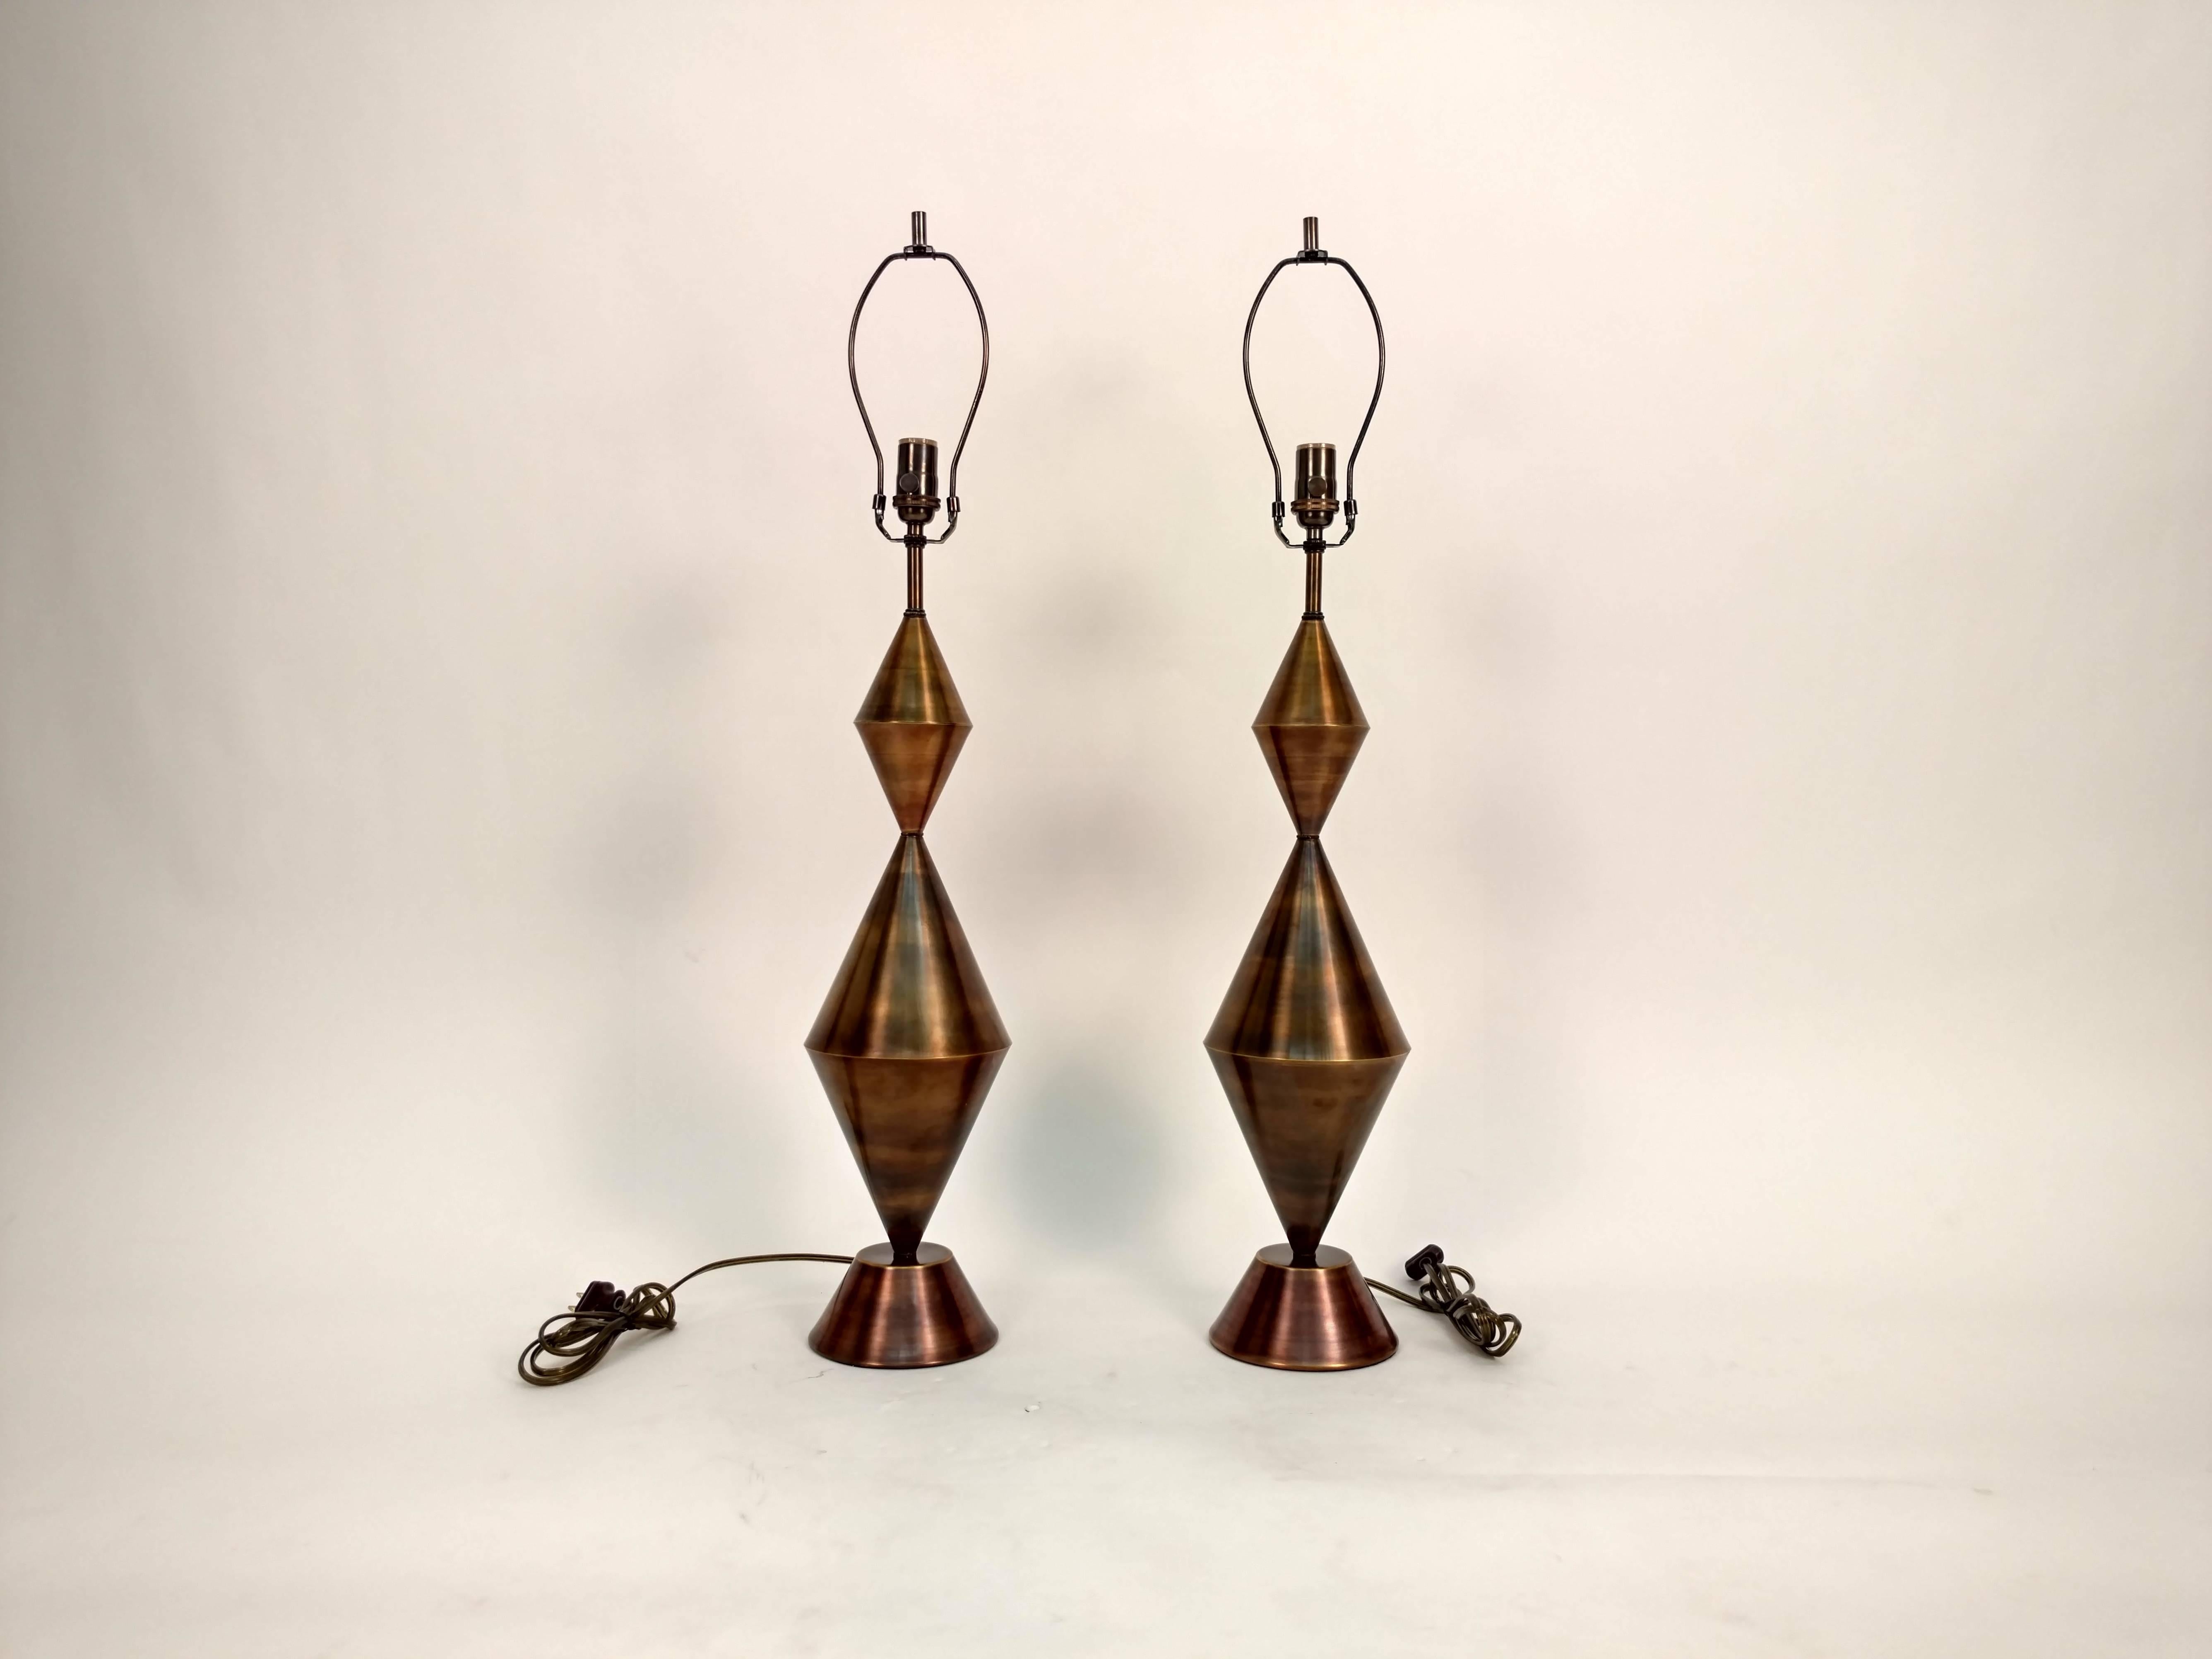 Pair of Antique Brass Conical Table Lamps Handcrafted 2